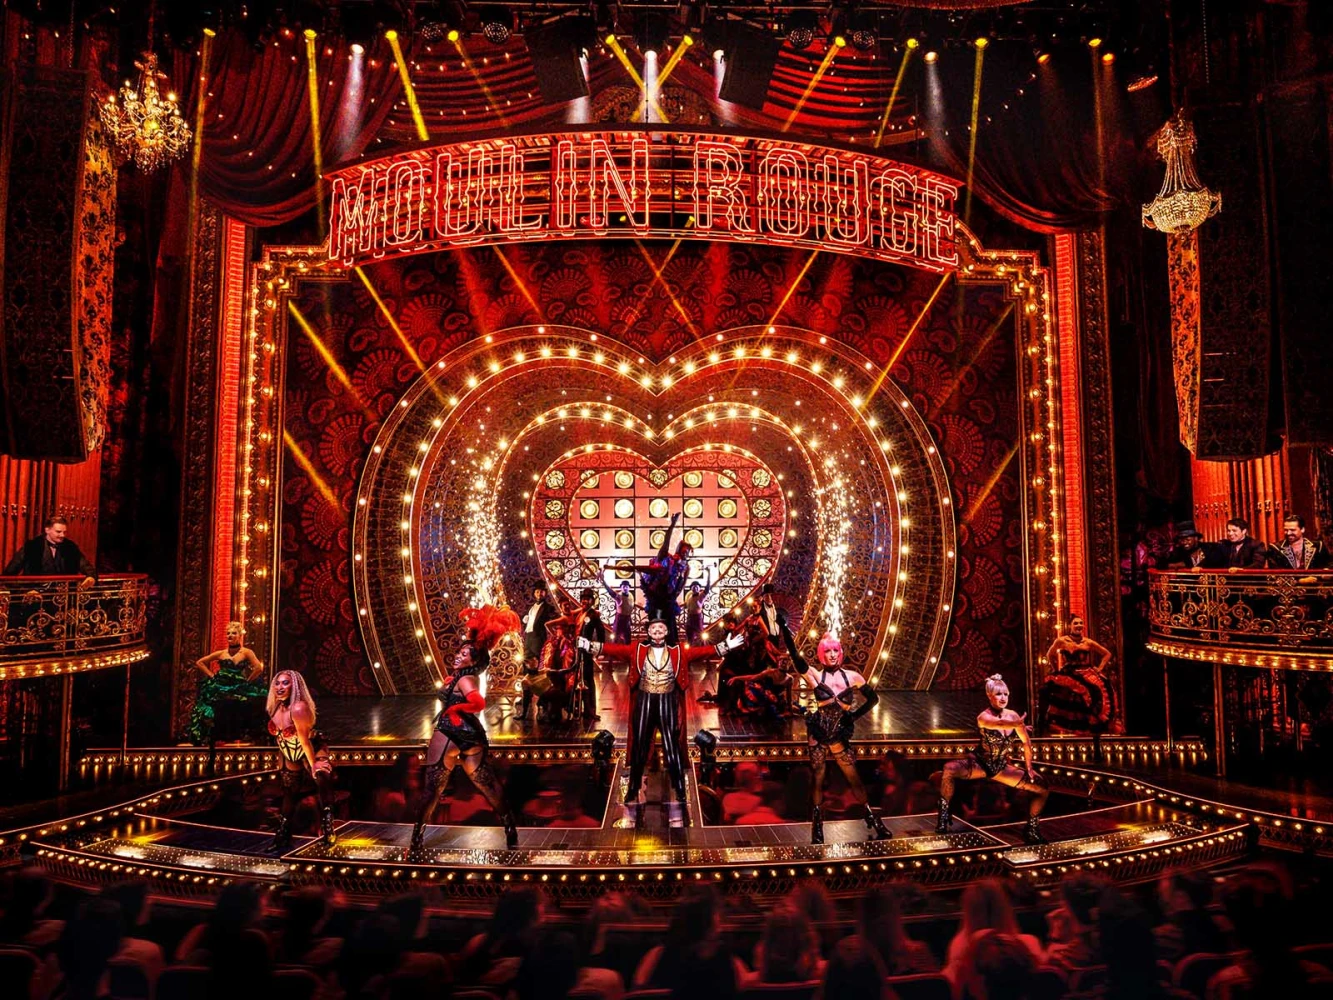 Moulin Rouge! The Musical: What to expect - 6